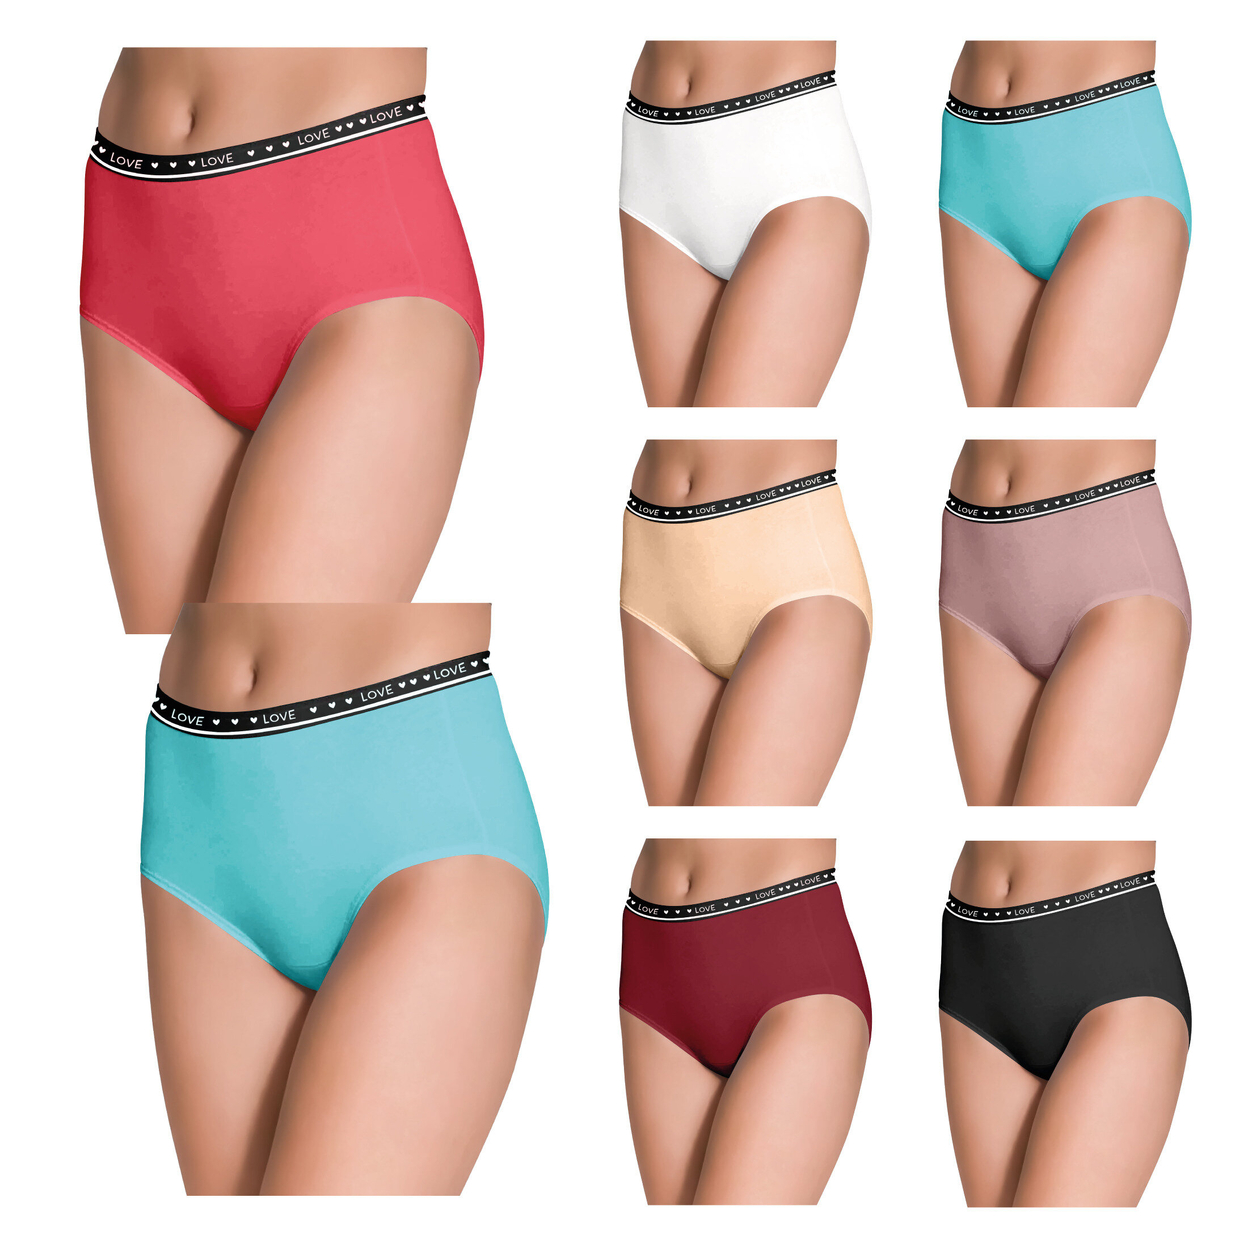 12-Pack: Women's Ultra Soft Moisture Wicking Panties Cotton Perfect Fit Underwear (Plus Sizes Available) - Xx-large